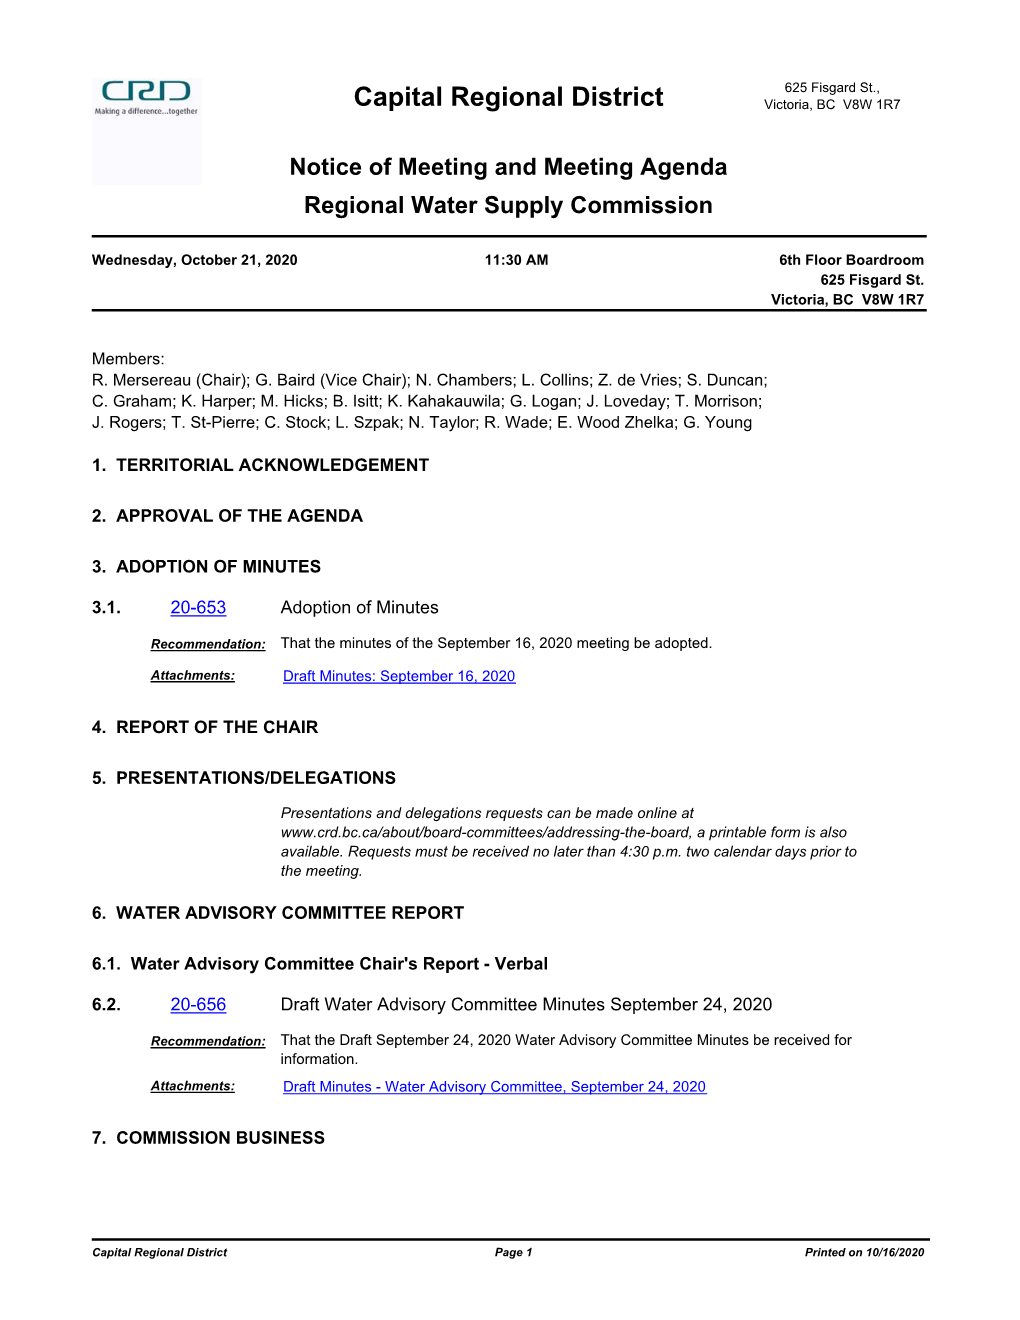 Regional Water Supply Service - 2021 Operating and Capital Budget